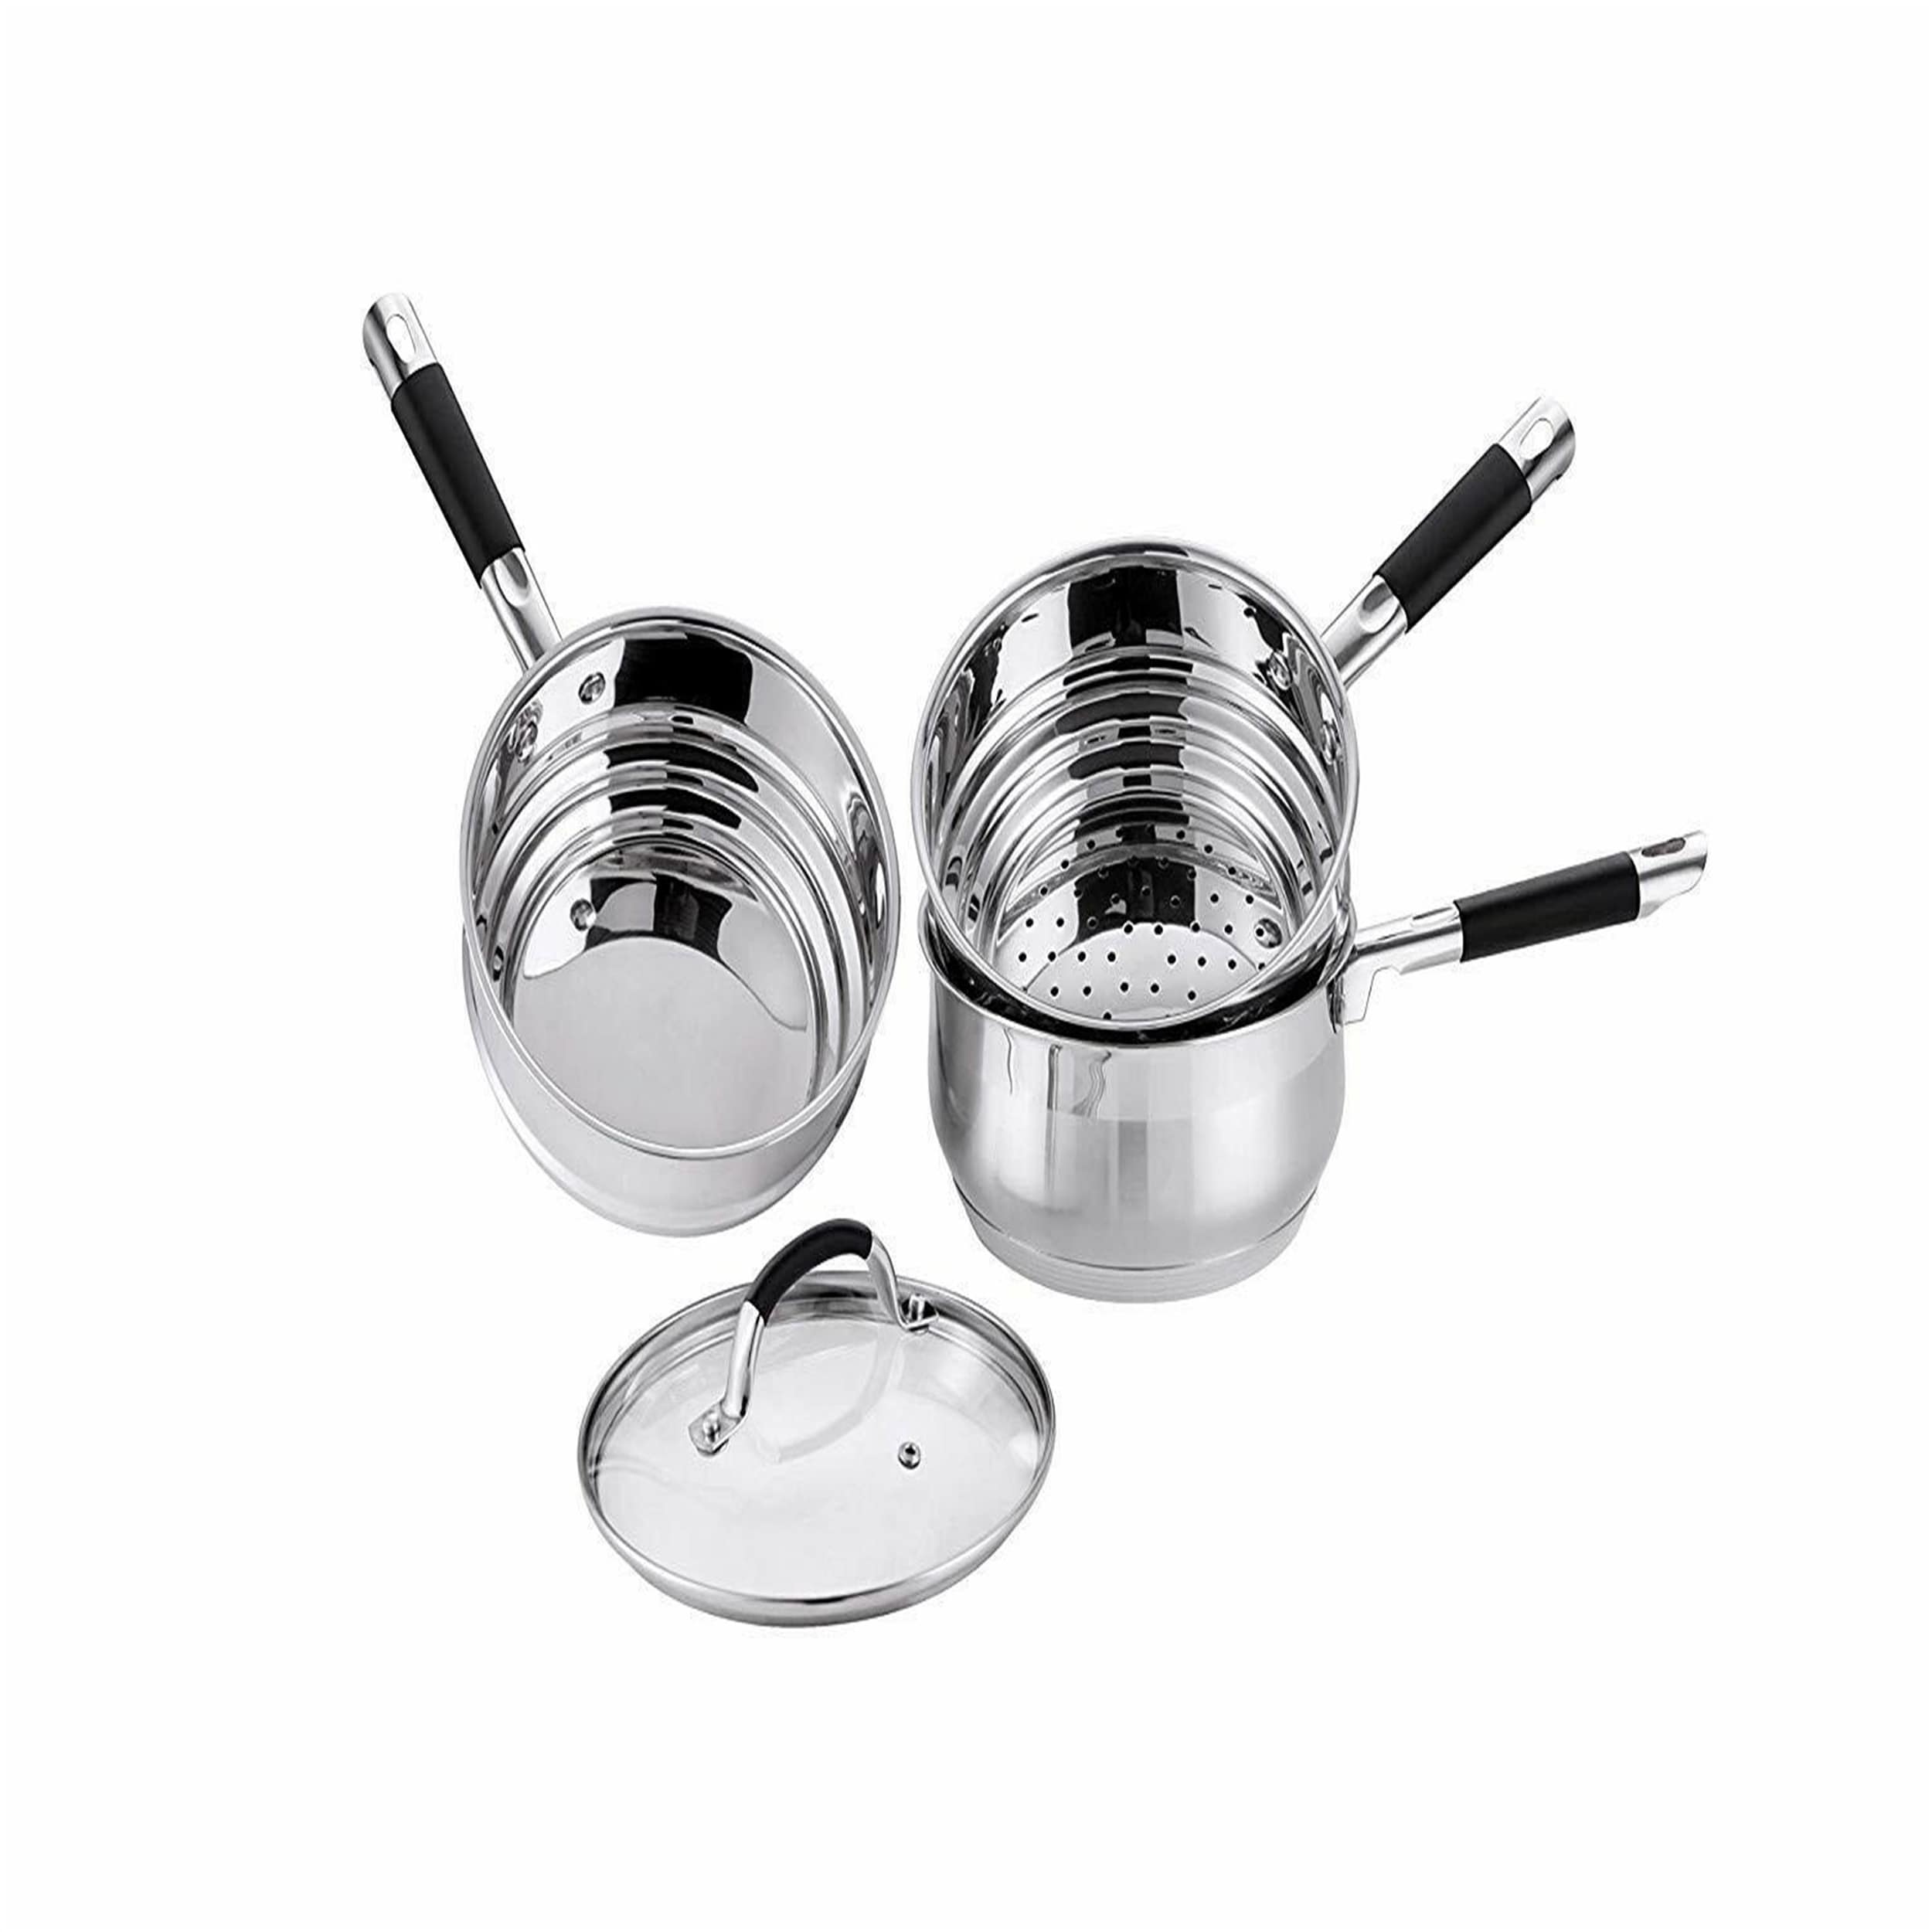 https://ak1.ostkcdn.com/images/products/is/images/direct/3618137f7268a3194914bc5ee4742badfa095fc0/3-Quart-Stainless-Steel-Premium-Double-Boiler-Multi-Pot-Steamer-Cookware.jpg